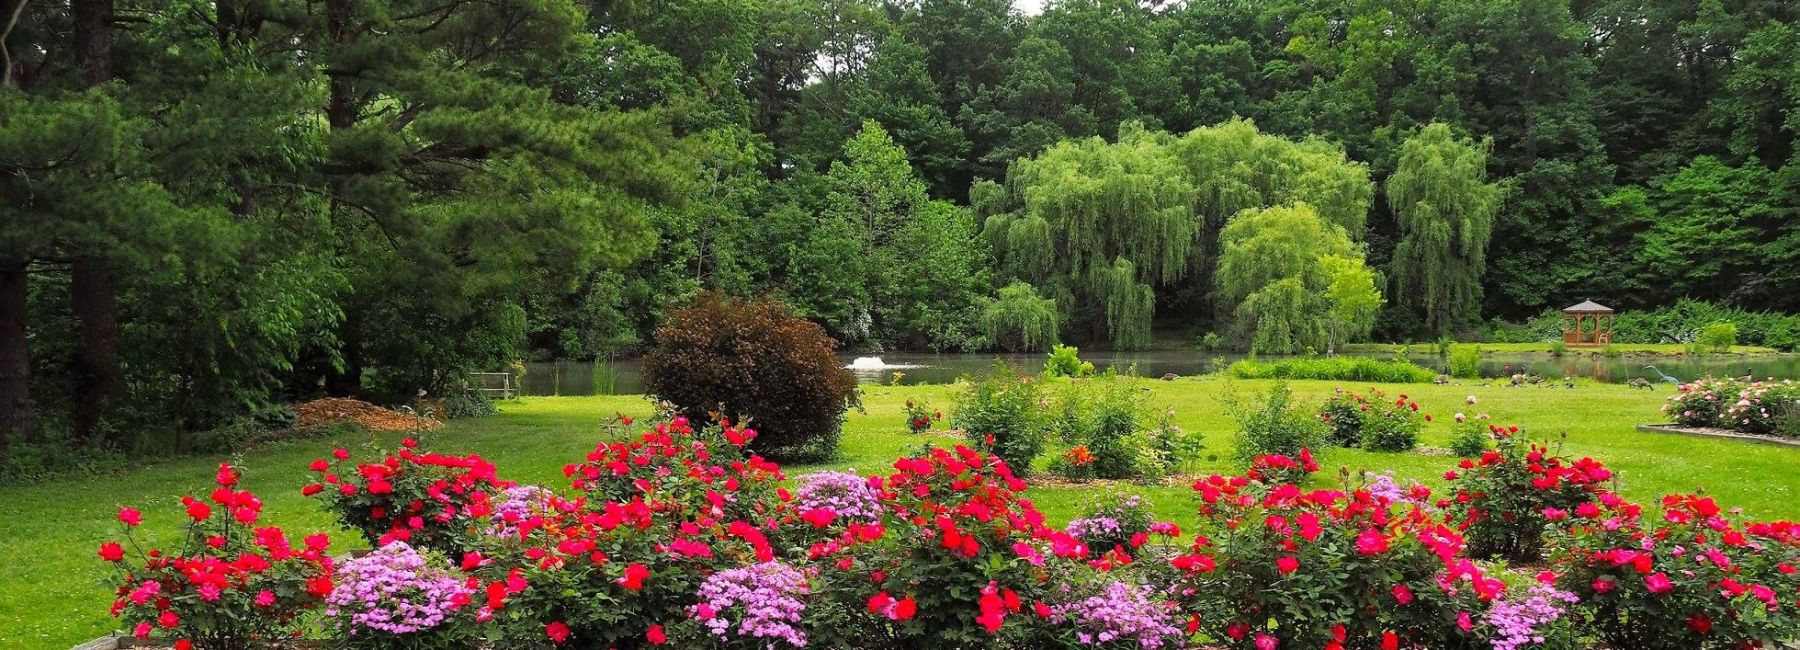 7 Amazing Gardens in Indiana's Cool North 2